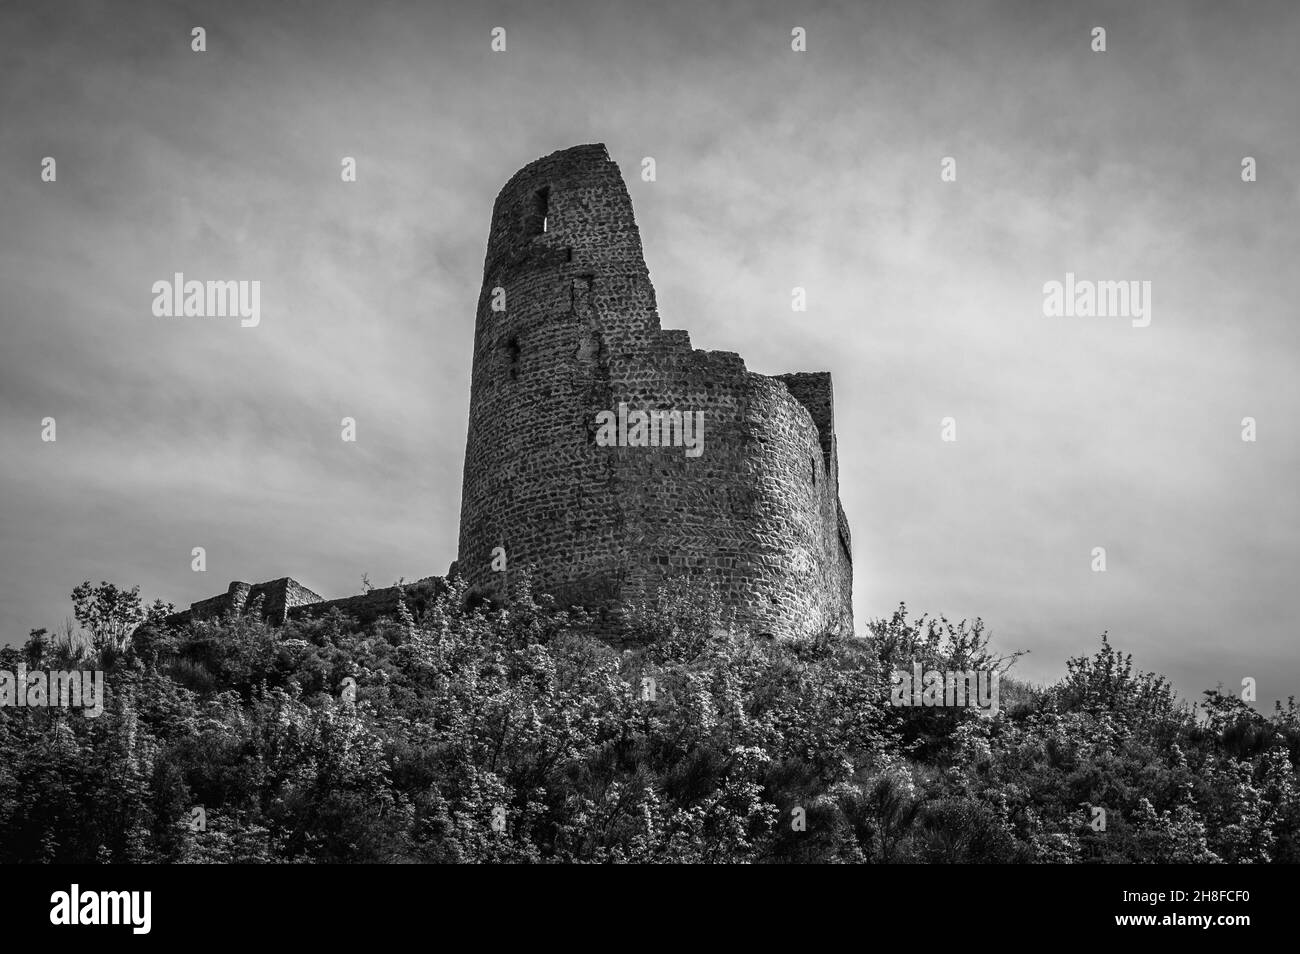 Ruins of a medieval cathedral against cloudy skies in the city of Mtskheta, Georgia. Black and white. Stock Photo